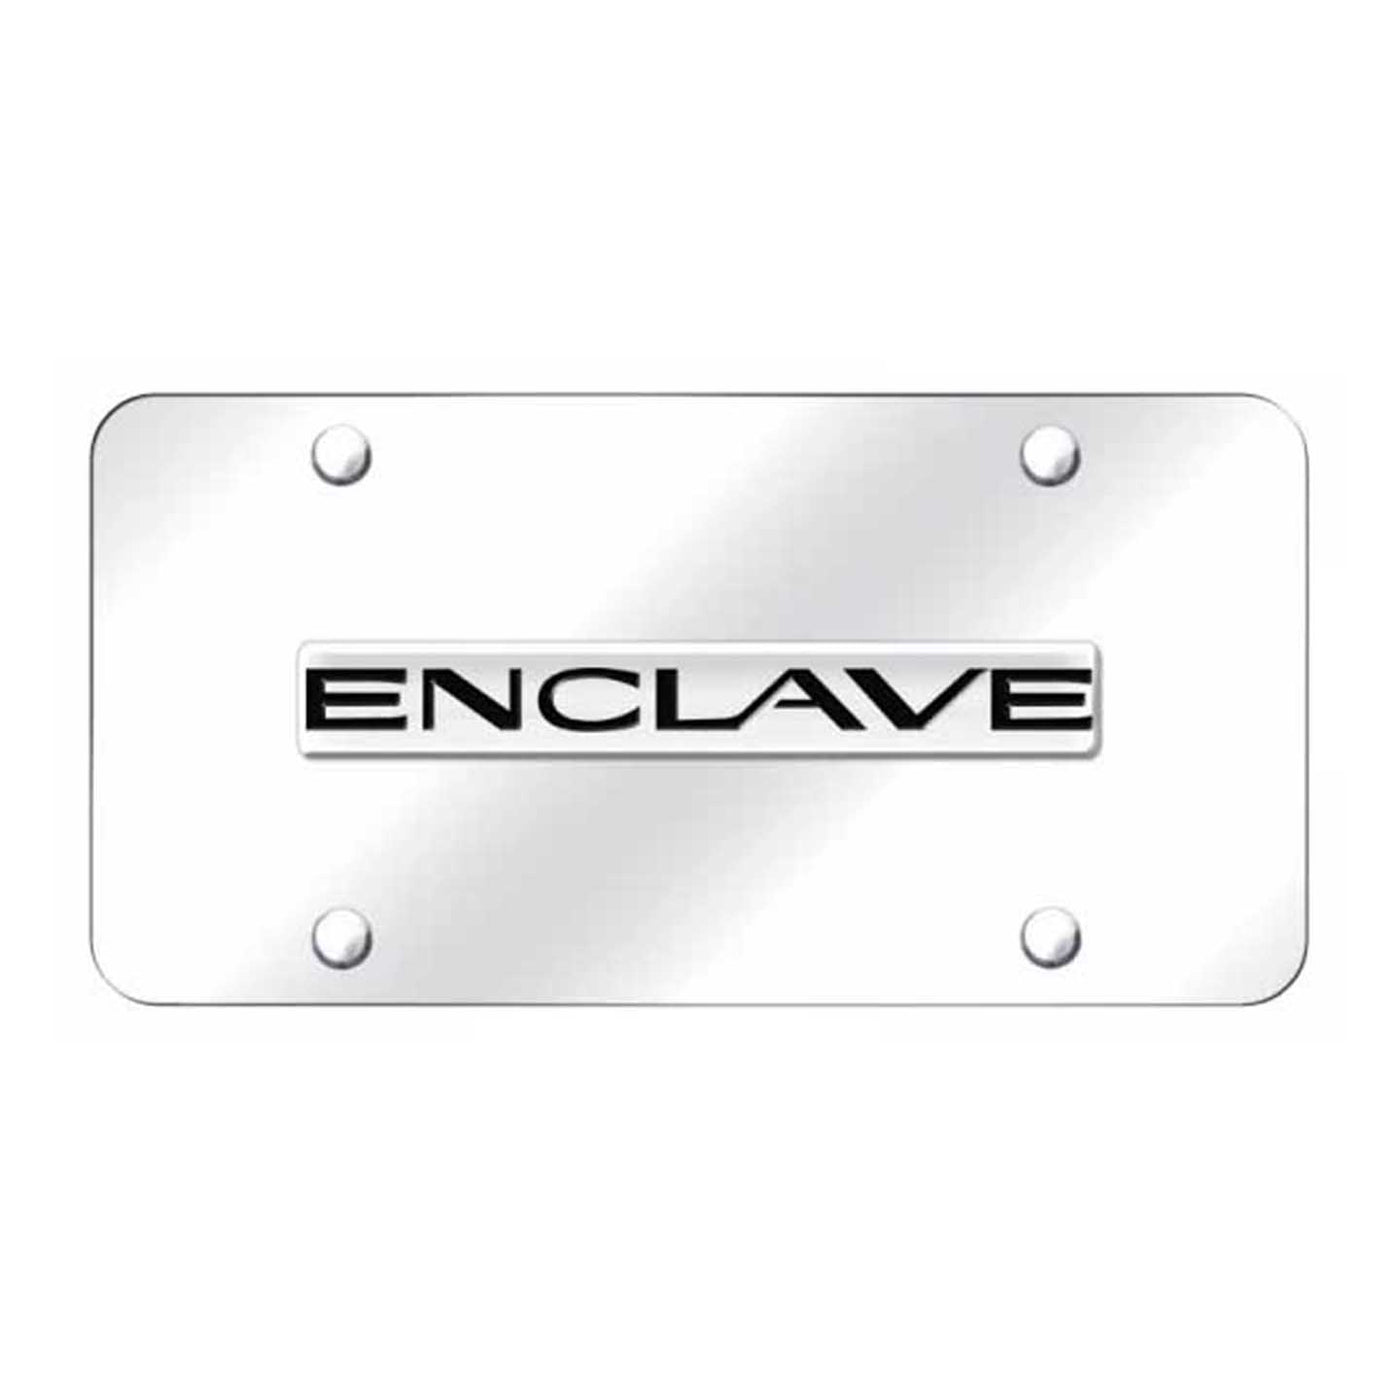 Enclave Name License Plate - Chrome on Mirrored